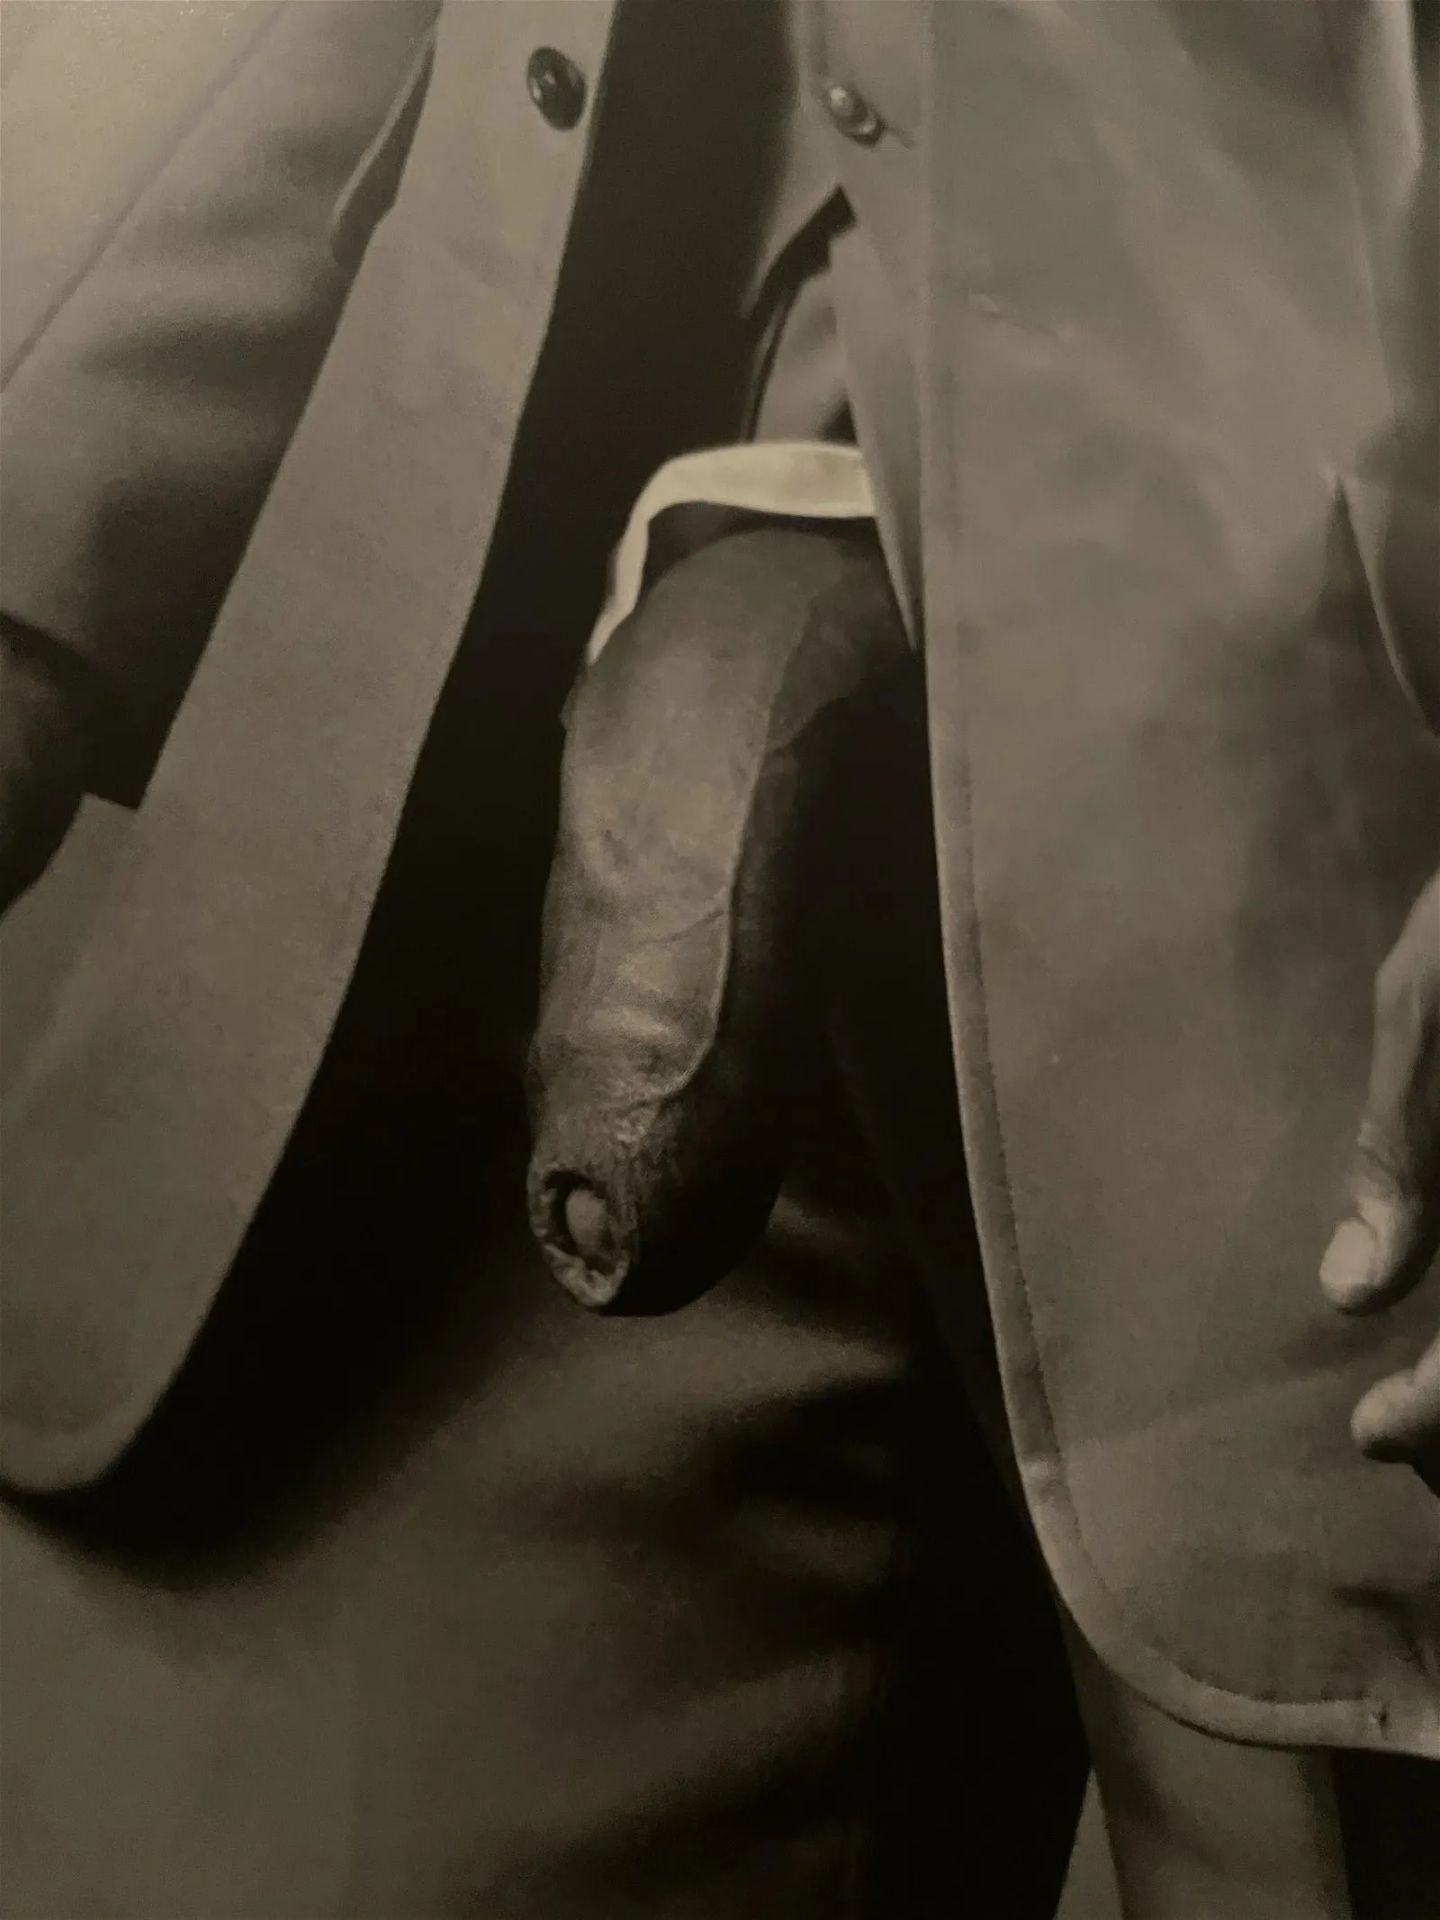 Robert Mapplethorpe "Man in Polyester Suit, 1980s" Print - Image 5 of 5